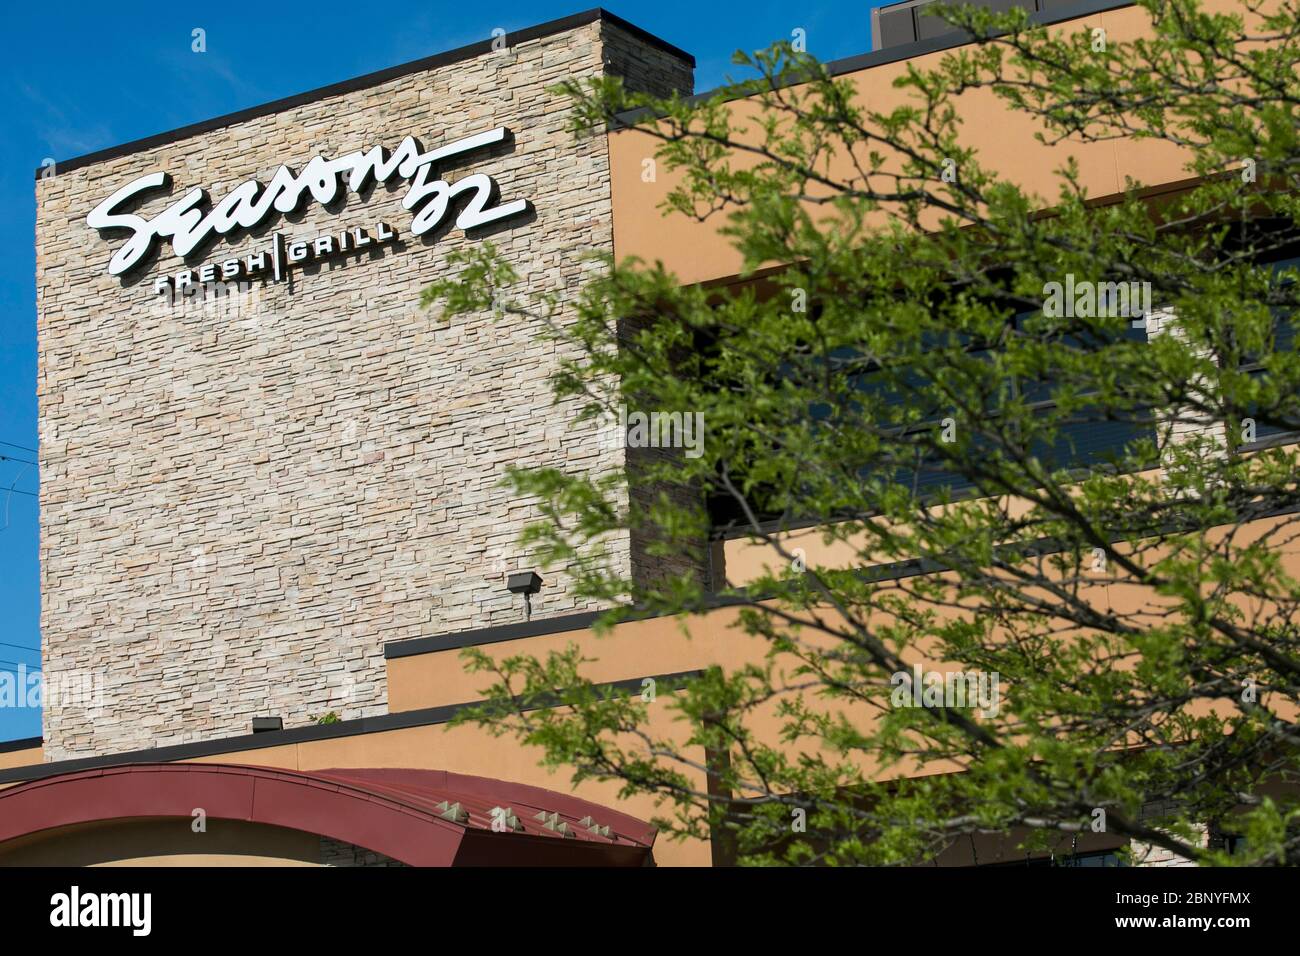 A logo sign outside of a Seasons 52 restaurant location in King of Prussia, Pennsylvania on May 4, 2020. Stock Photo